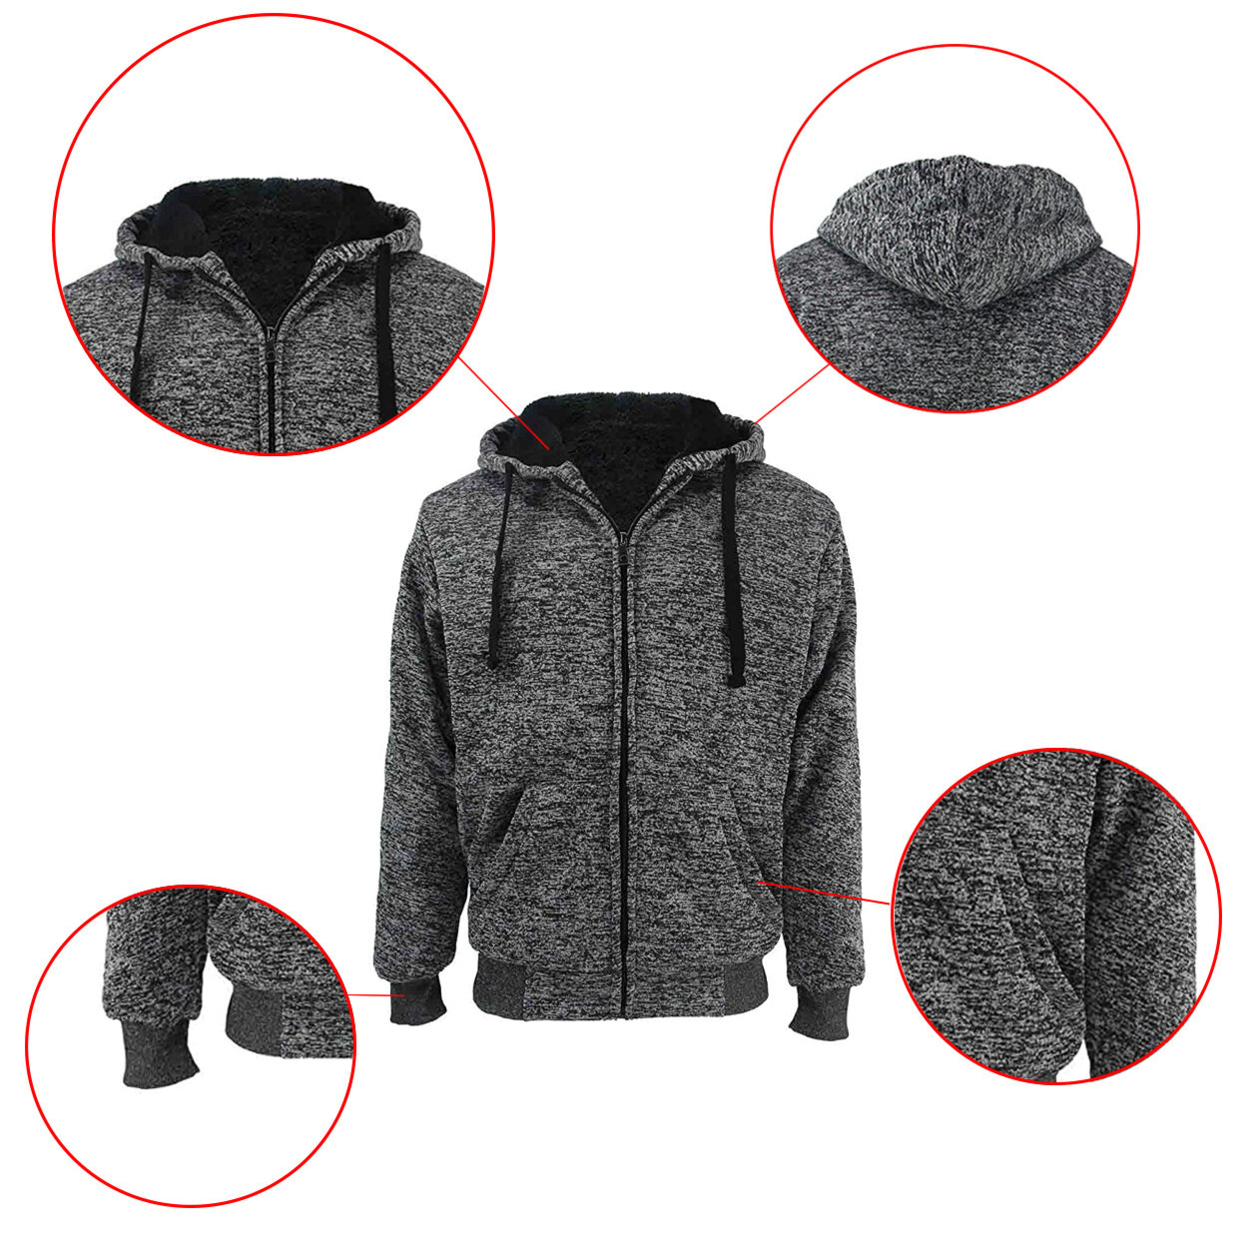 2-Pack: Men's Marled Extra-Thick Sherpa-Lined Fleece Hoodies - Large